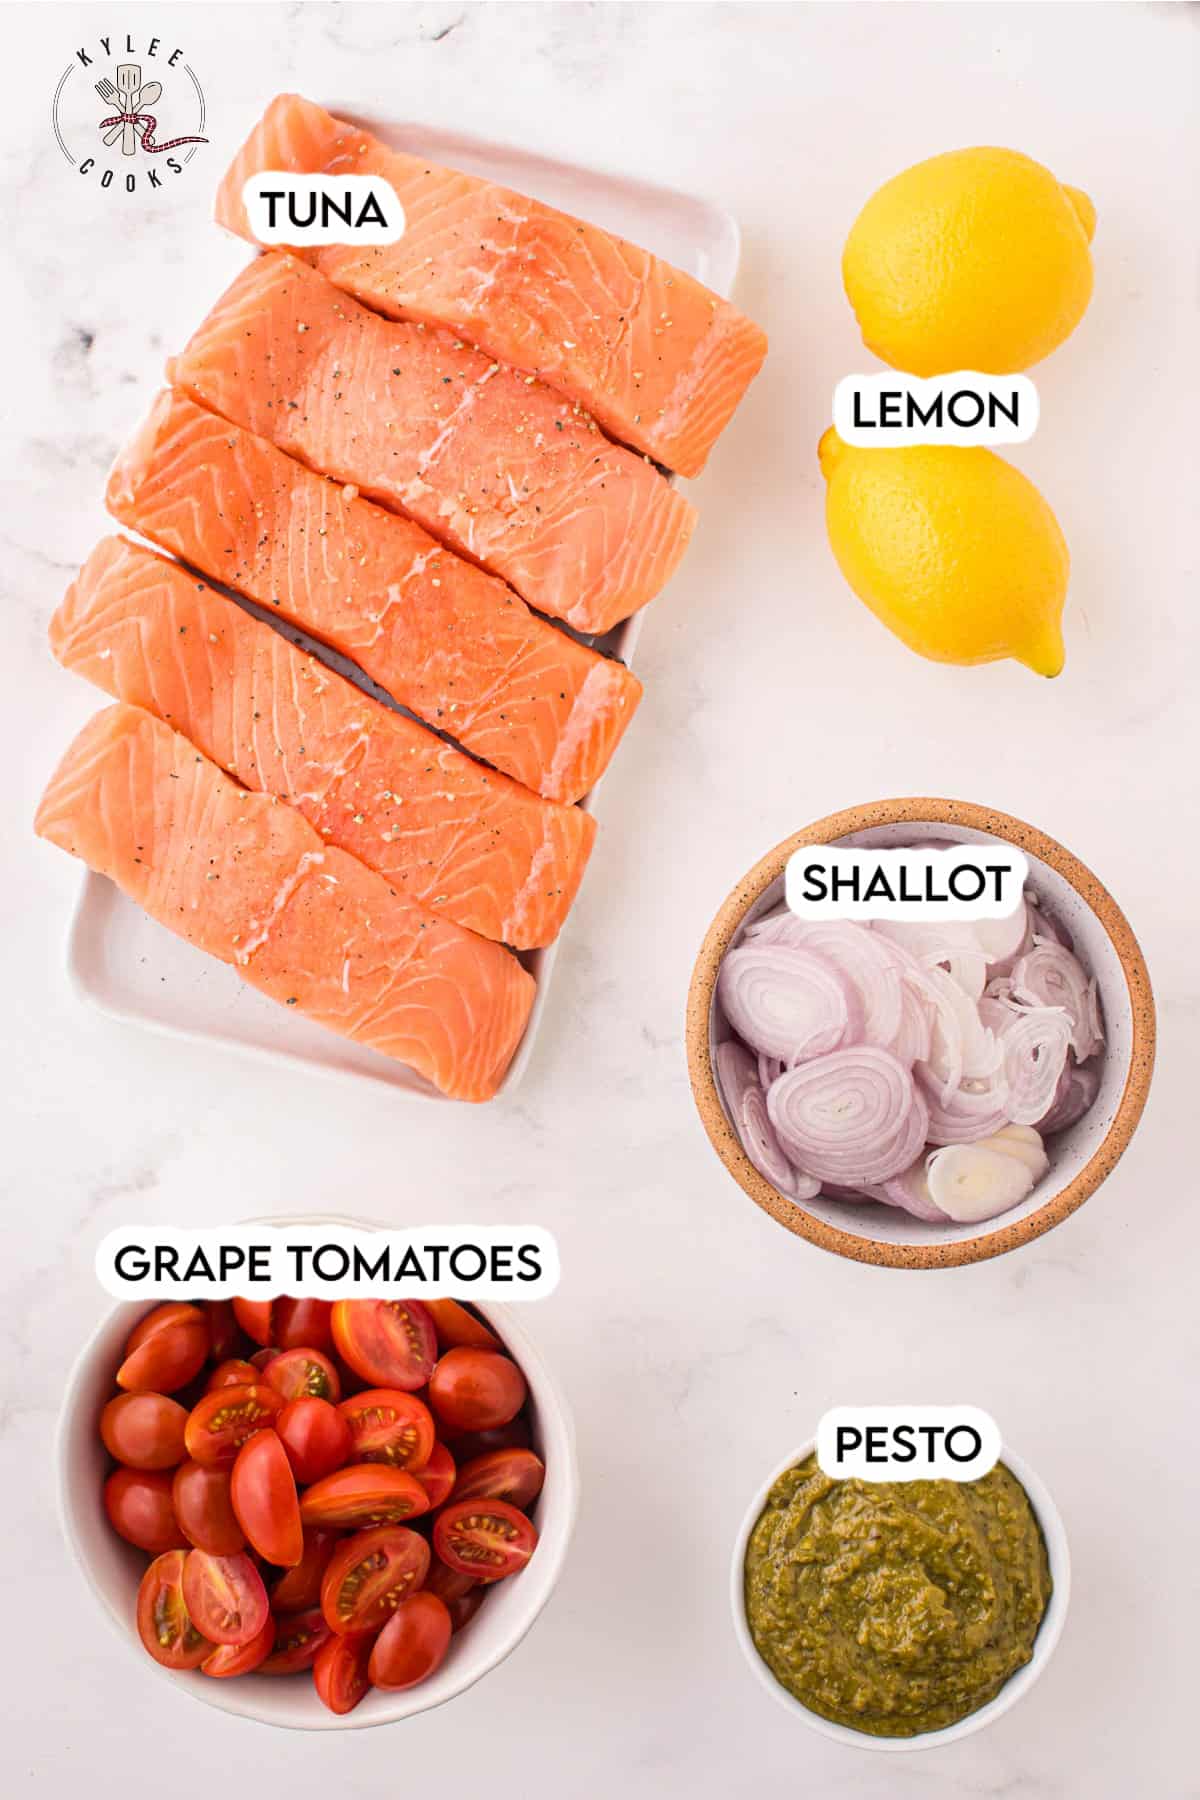 ingredients to make salmon with pesto laid out and labeled.